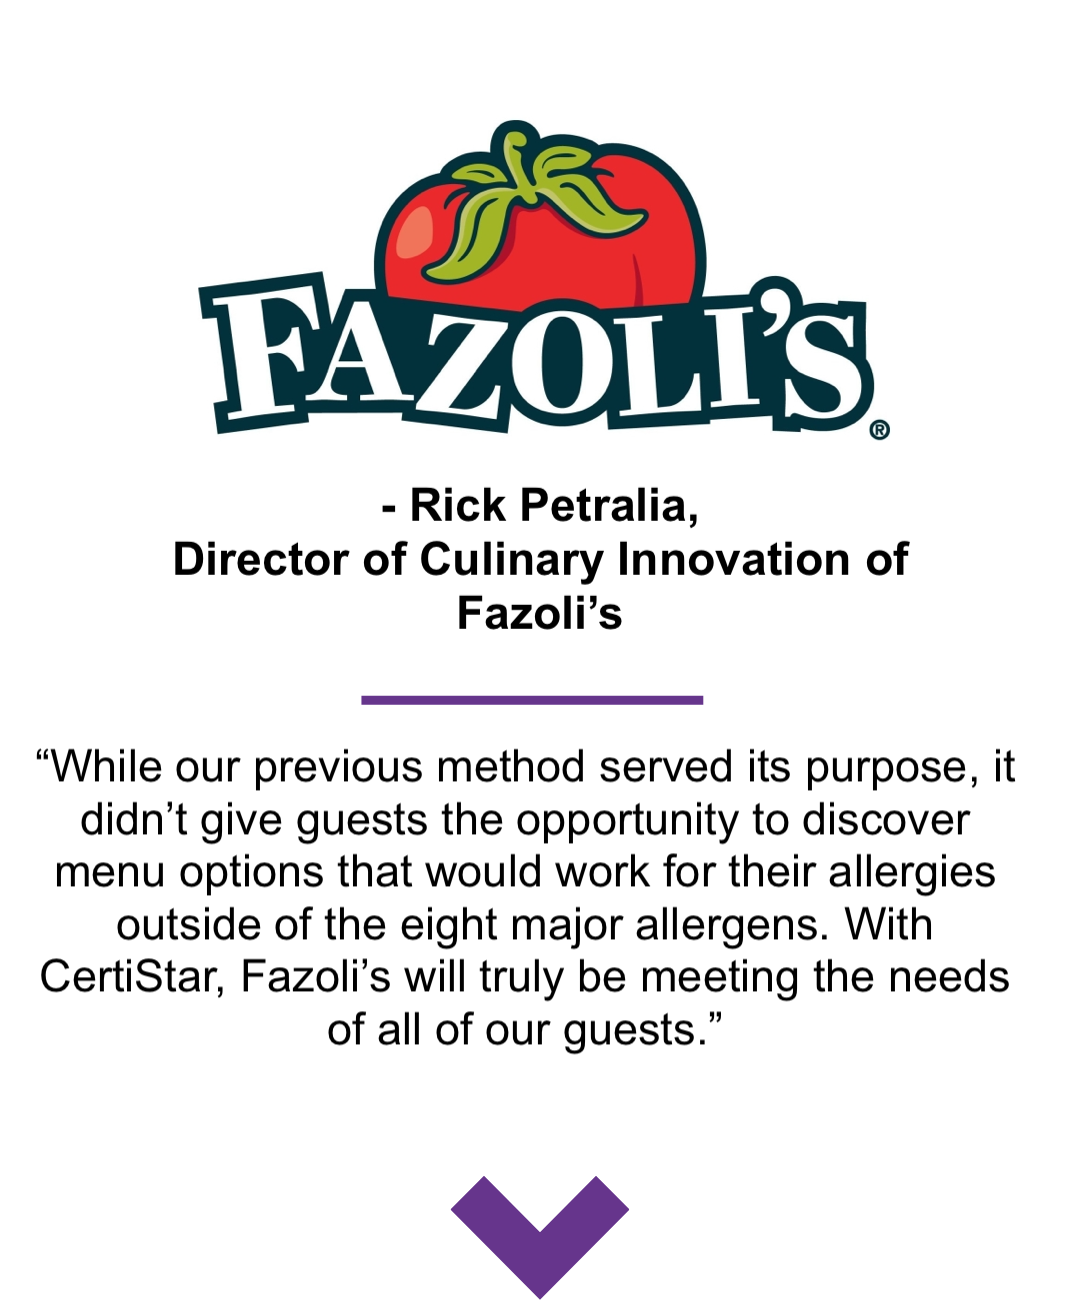 Fazoli's Quote While our previous method served its purpose, it didn’t give guests the opportunity to discover menu options that would work for their allergies outside of the eight major allergens. With CertiStar, Fazoli’s will truly be meeting the needs of all of our guests.